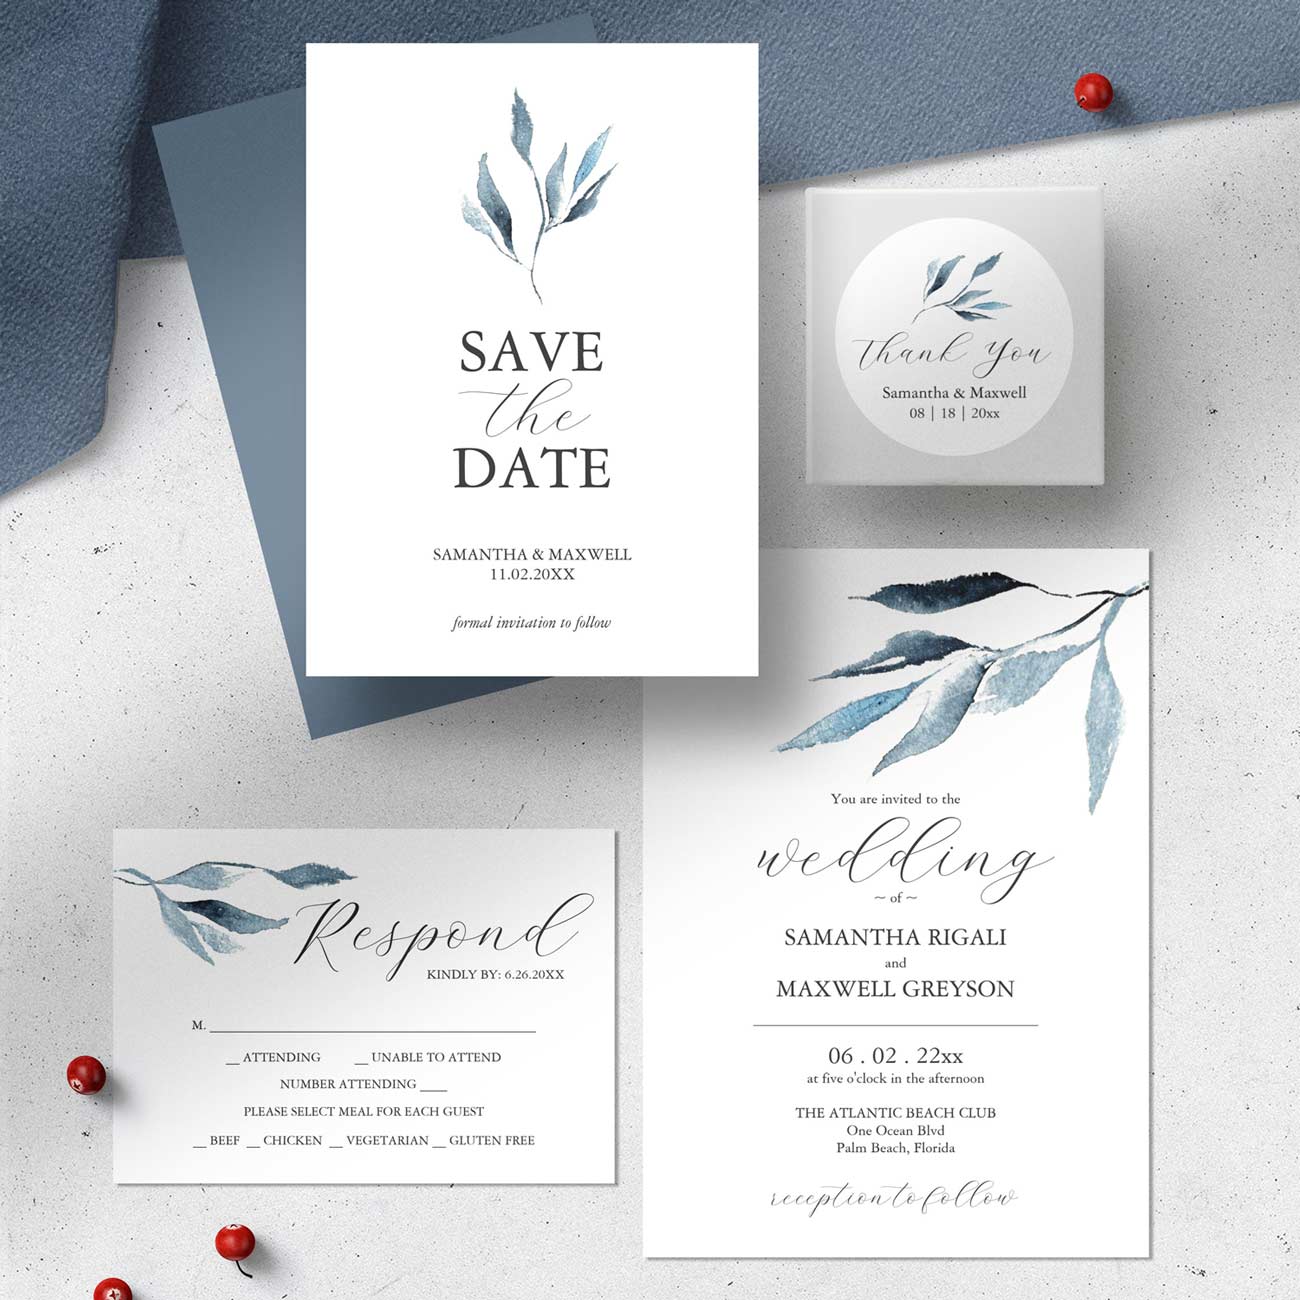 Dusty blue wedding invitation and stationery theme features unique watercolor botanical art by Victoria Grigaliunas. Click to shop the line.